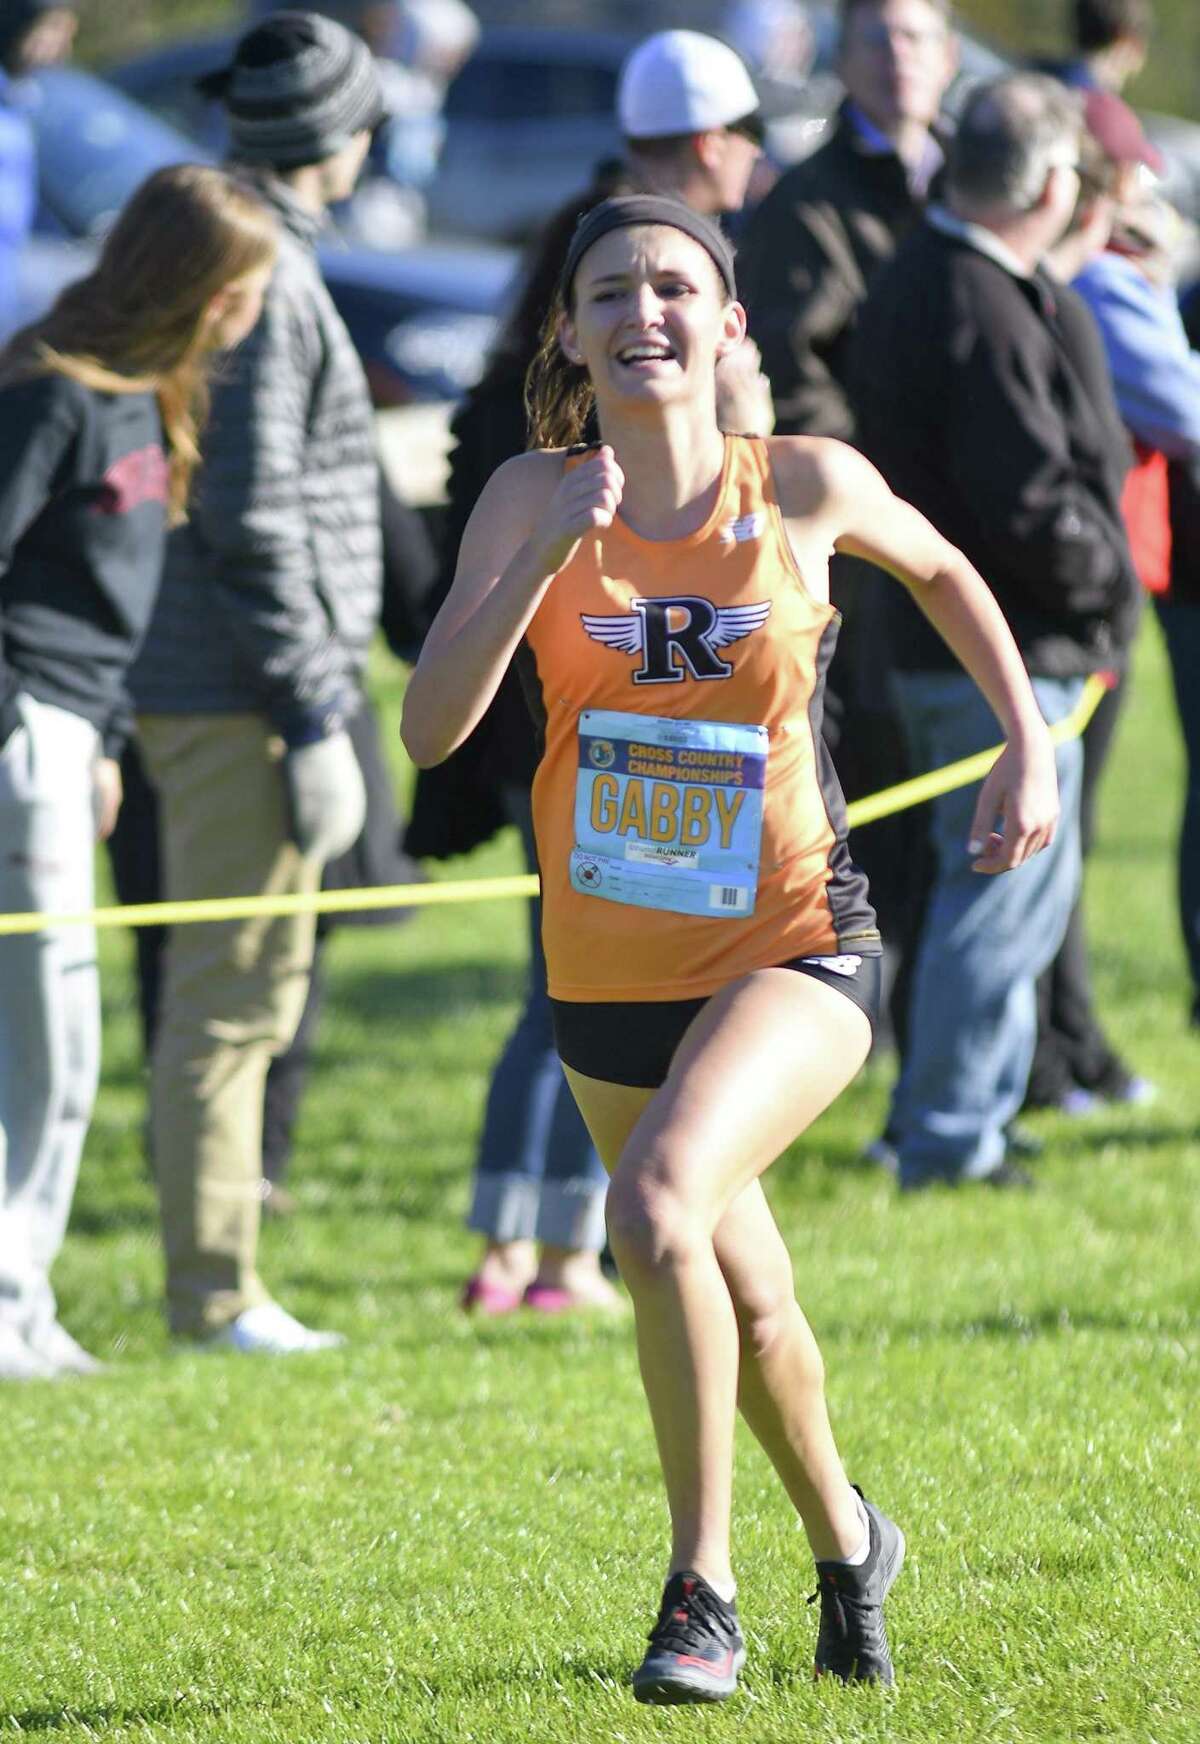 Ridgefield's Gabriella Viggiano heads to the finish line during the 2018 Cross Country Championships at Waveny Park in New Canaan, Connecticut., Thursday, Oct. 18, 2018. Viggiano 14:39.07 at the finish, edged out Danbury's Lauren Moore time of 14:39.53 to take first place, helping secure an over all third place girls team championship.